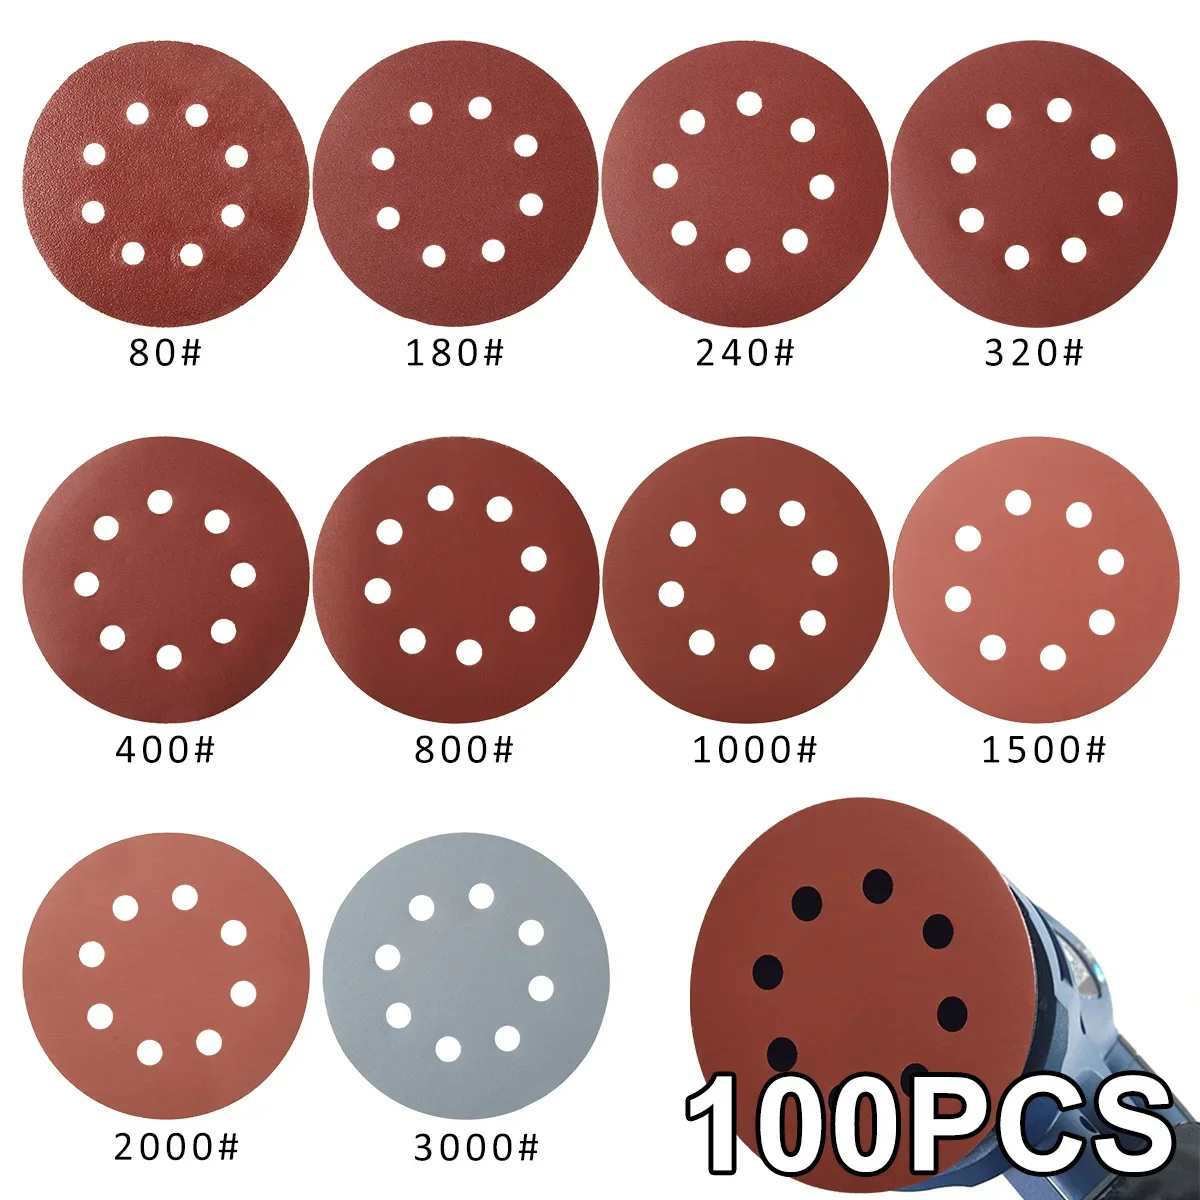 

100Pcs 5Inch Round Sand Paper For Sanding Disc Grinder Sanding Sheet Car Polishing Sander Sandpaper Grit 800 1000 1500 2000 3000